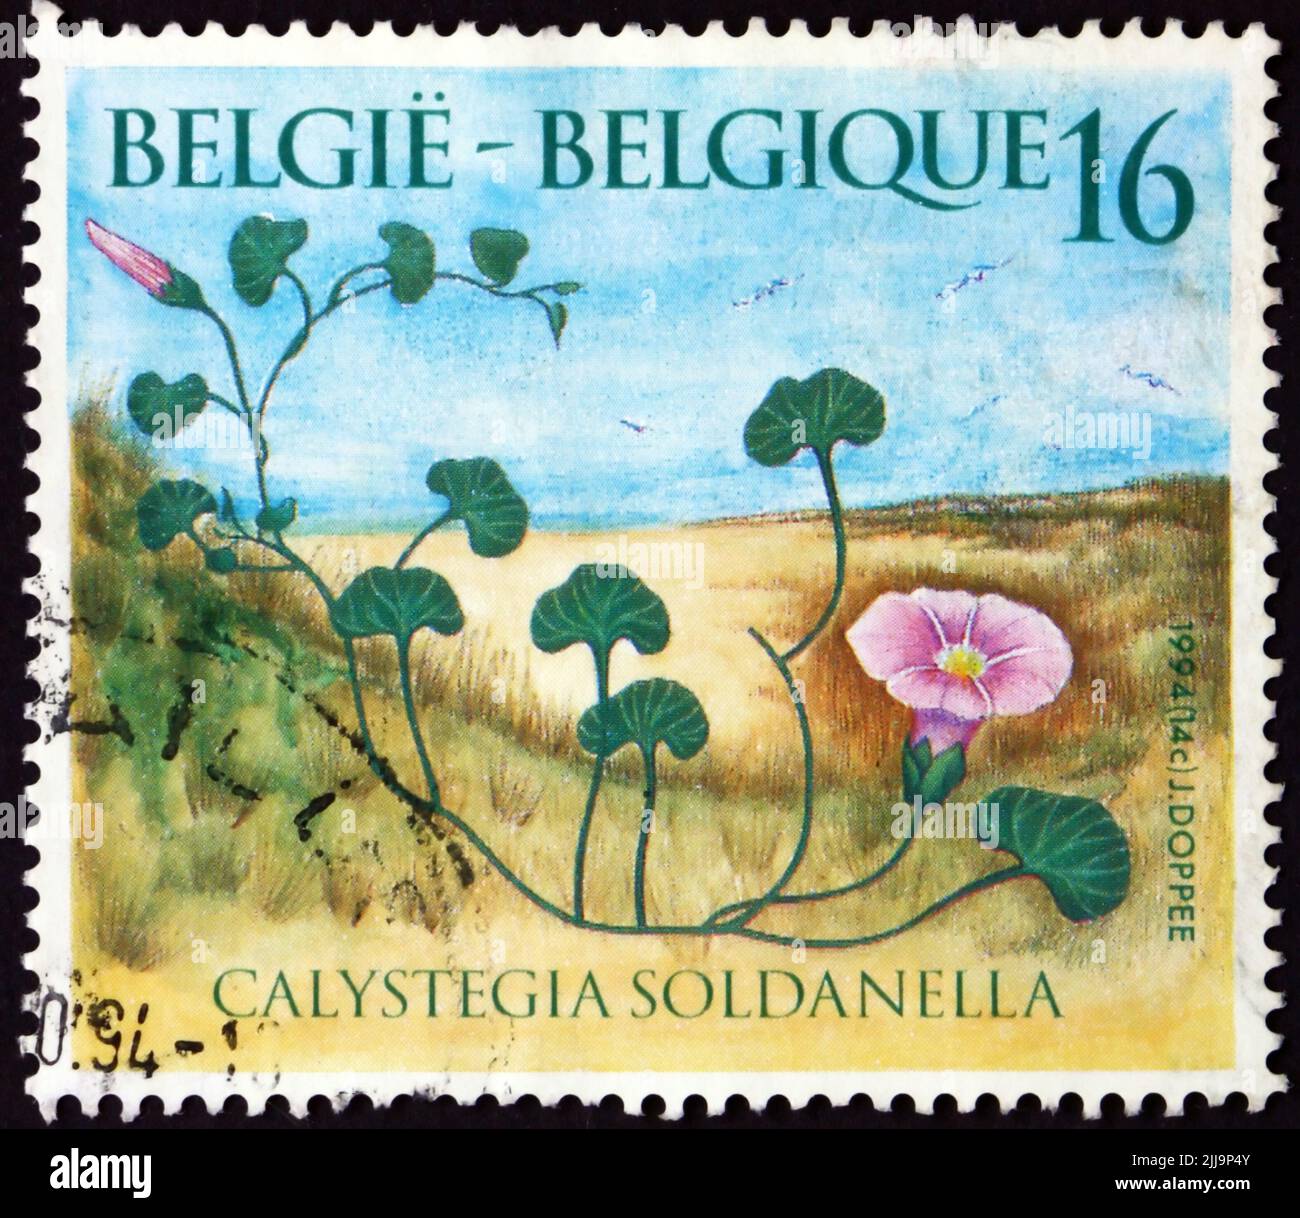 BELGIUM - CIRCA 1994: a stamp printed in Belgium shows morning glory, calystegia soldanella, is a perennial vine which grows in beach sand in temperat Stock Photo